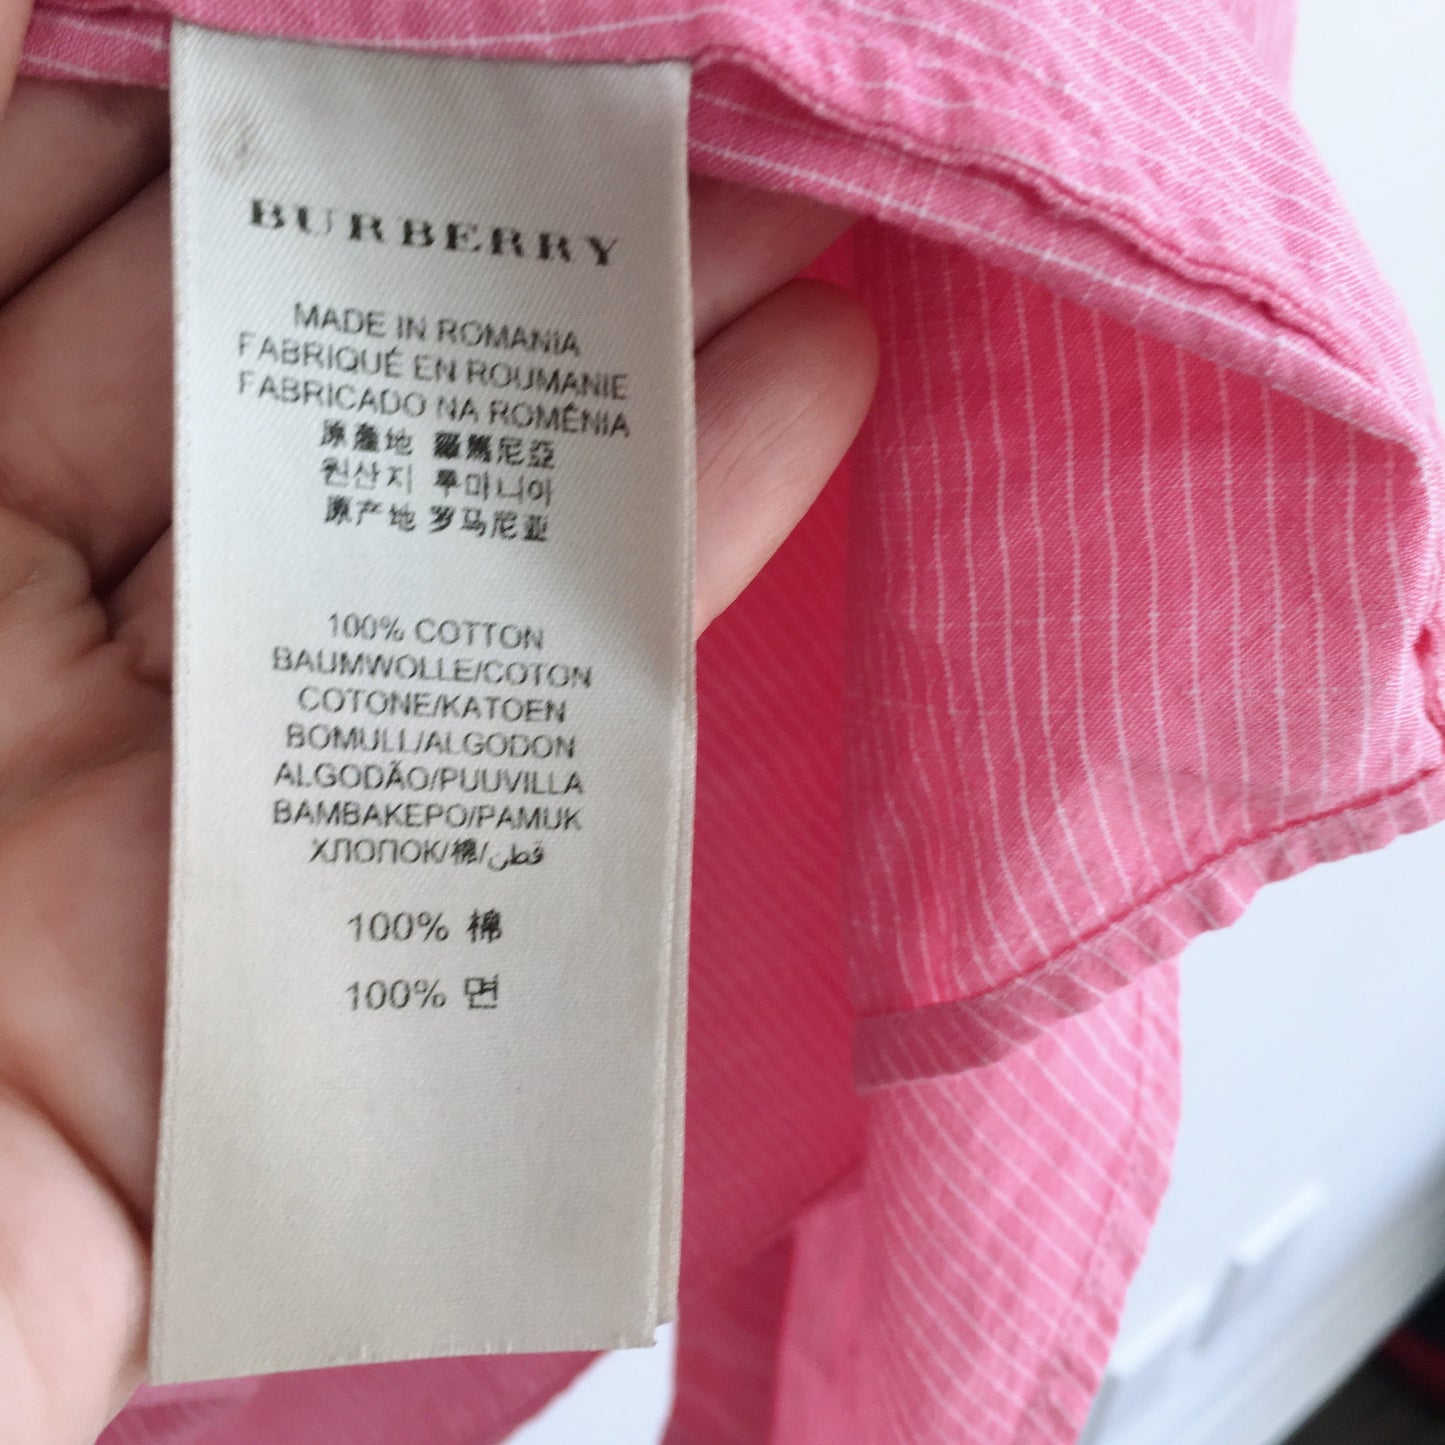 Burberry Brit Pink Striped Shirt - size Large